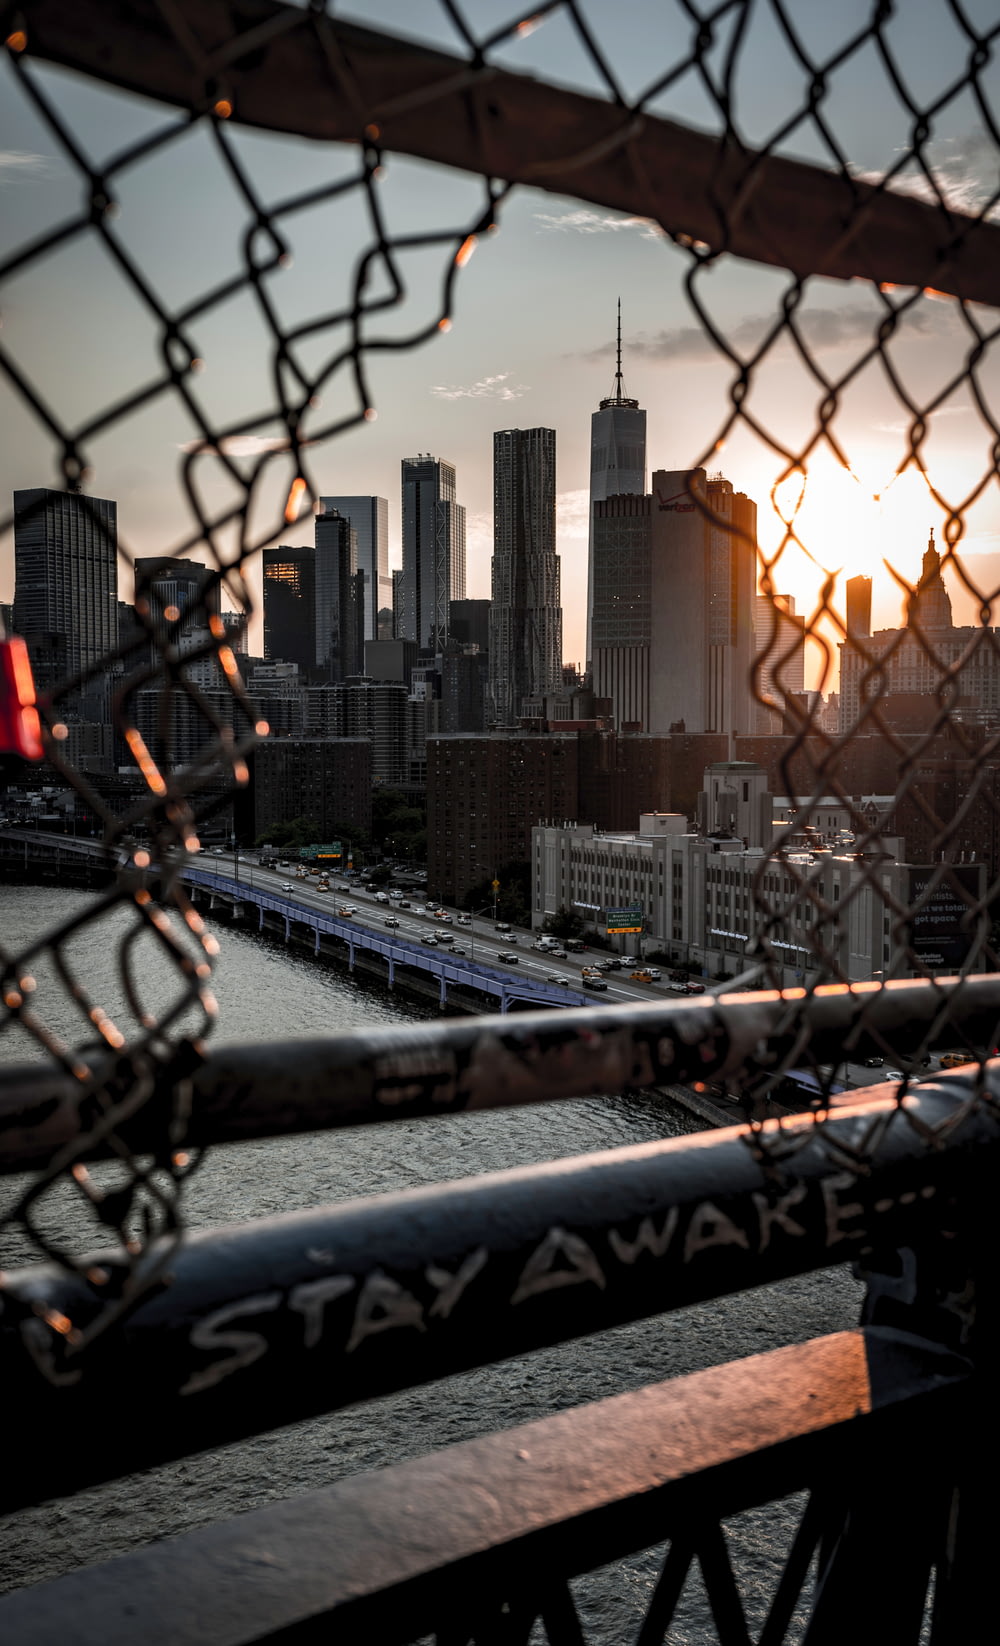 chain link fence overlooking high rise building